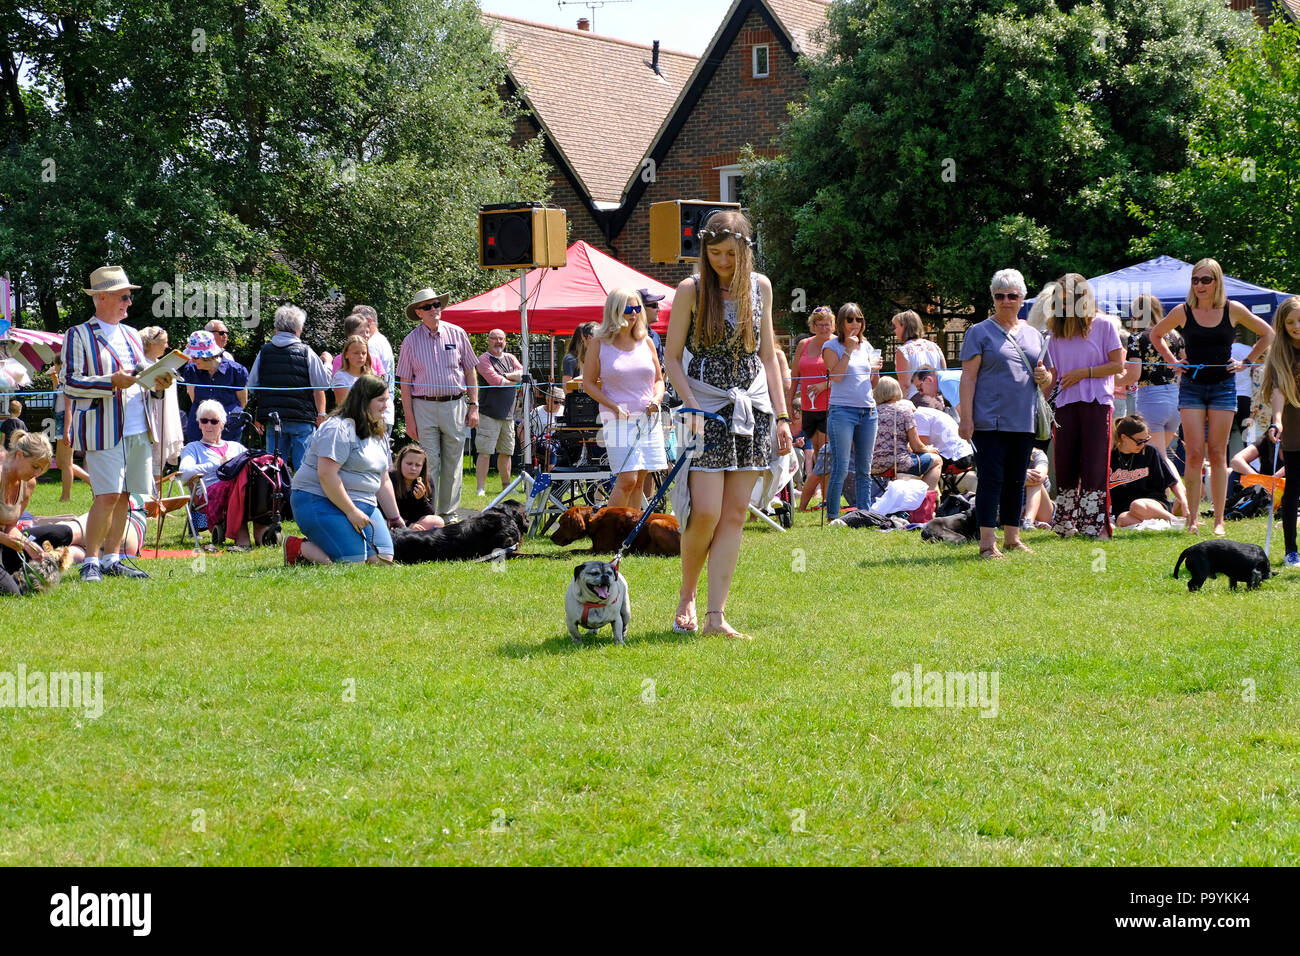 East Preston, West Sussex, UK. Fun dog show held on village green - teenage girl showing her pet dog Stock Photo